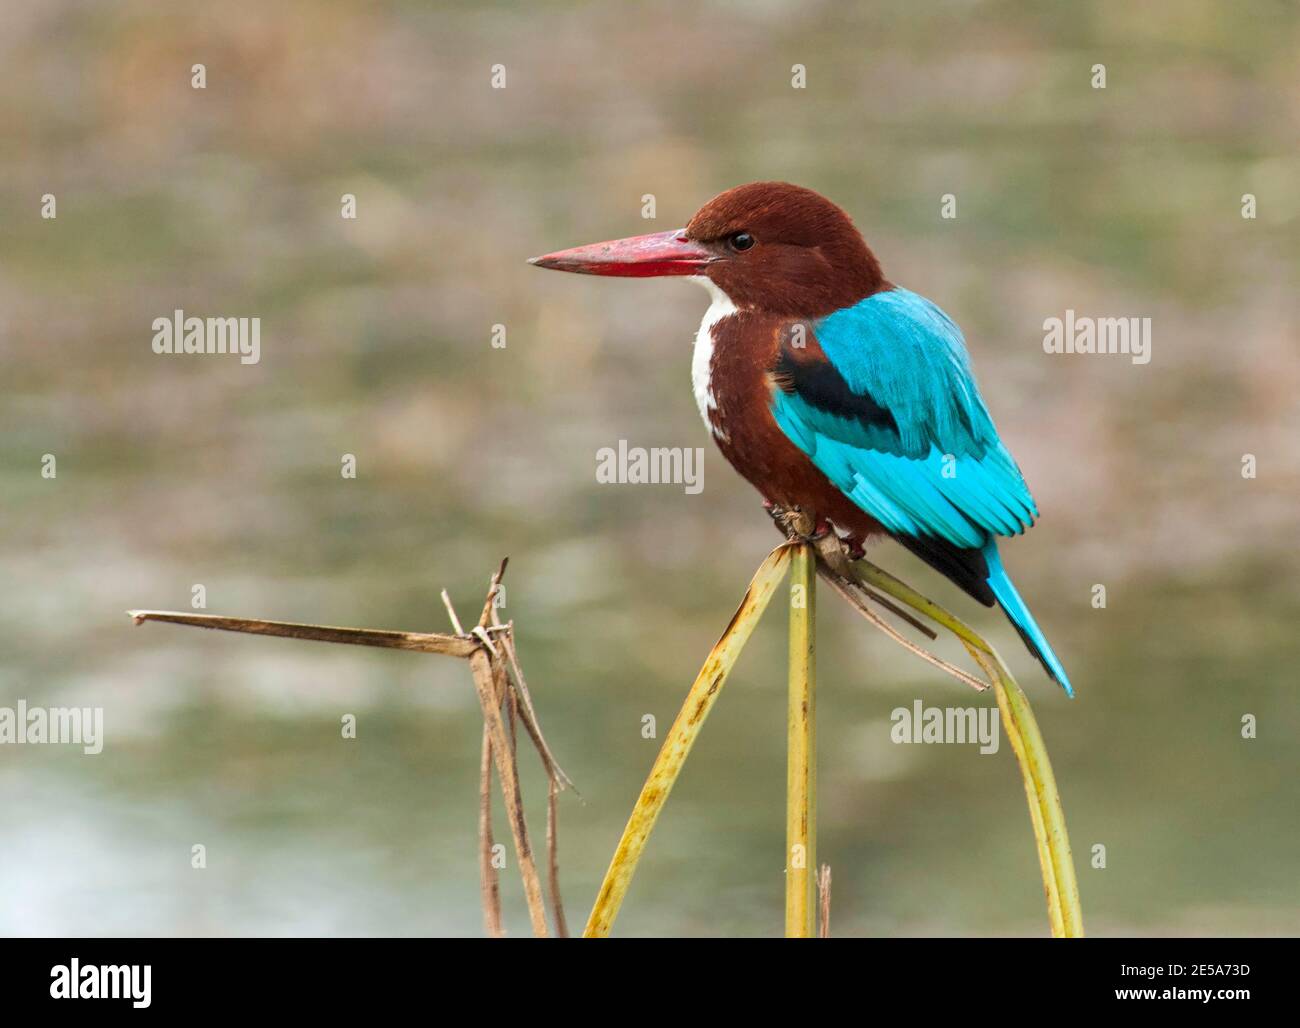 white-throated kingfisher, White-breasted Kingfisher, River Kingfisher (Halcyon smyrnensis fusca, Halcyon fusca), perching on a stem, India Stock Photo